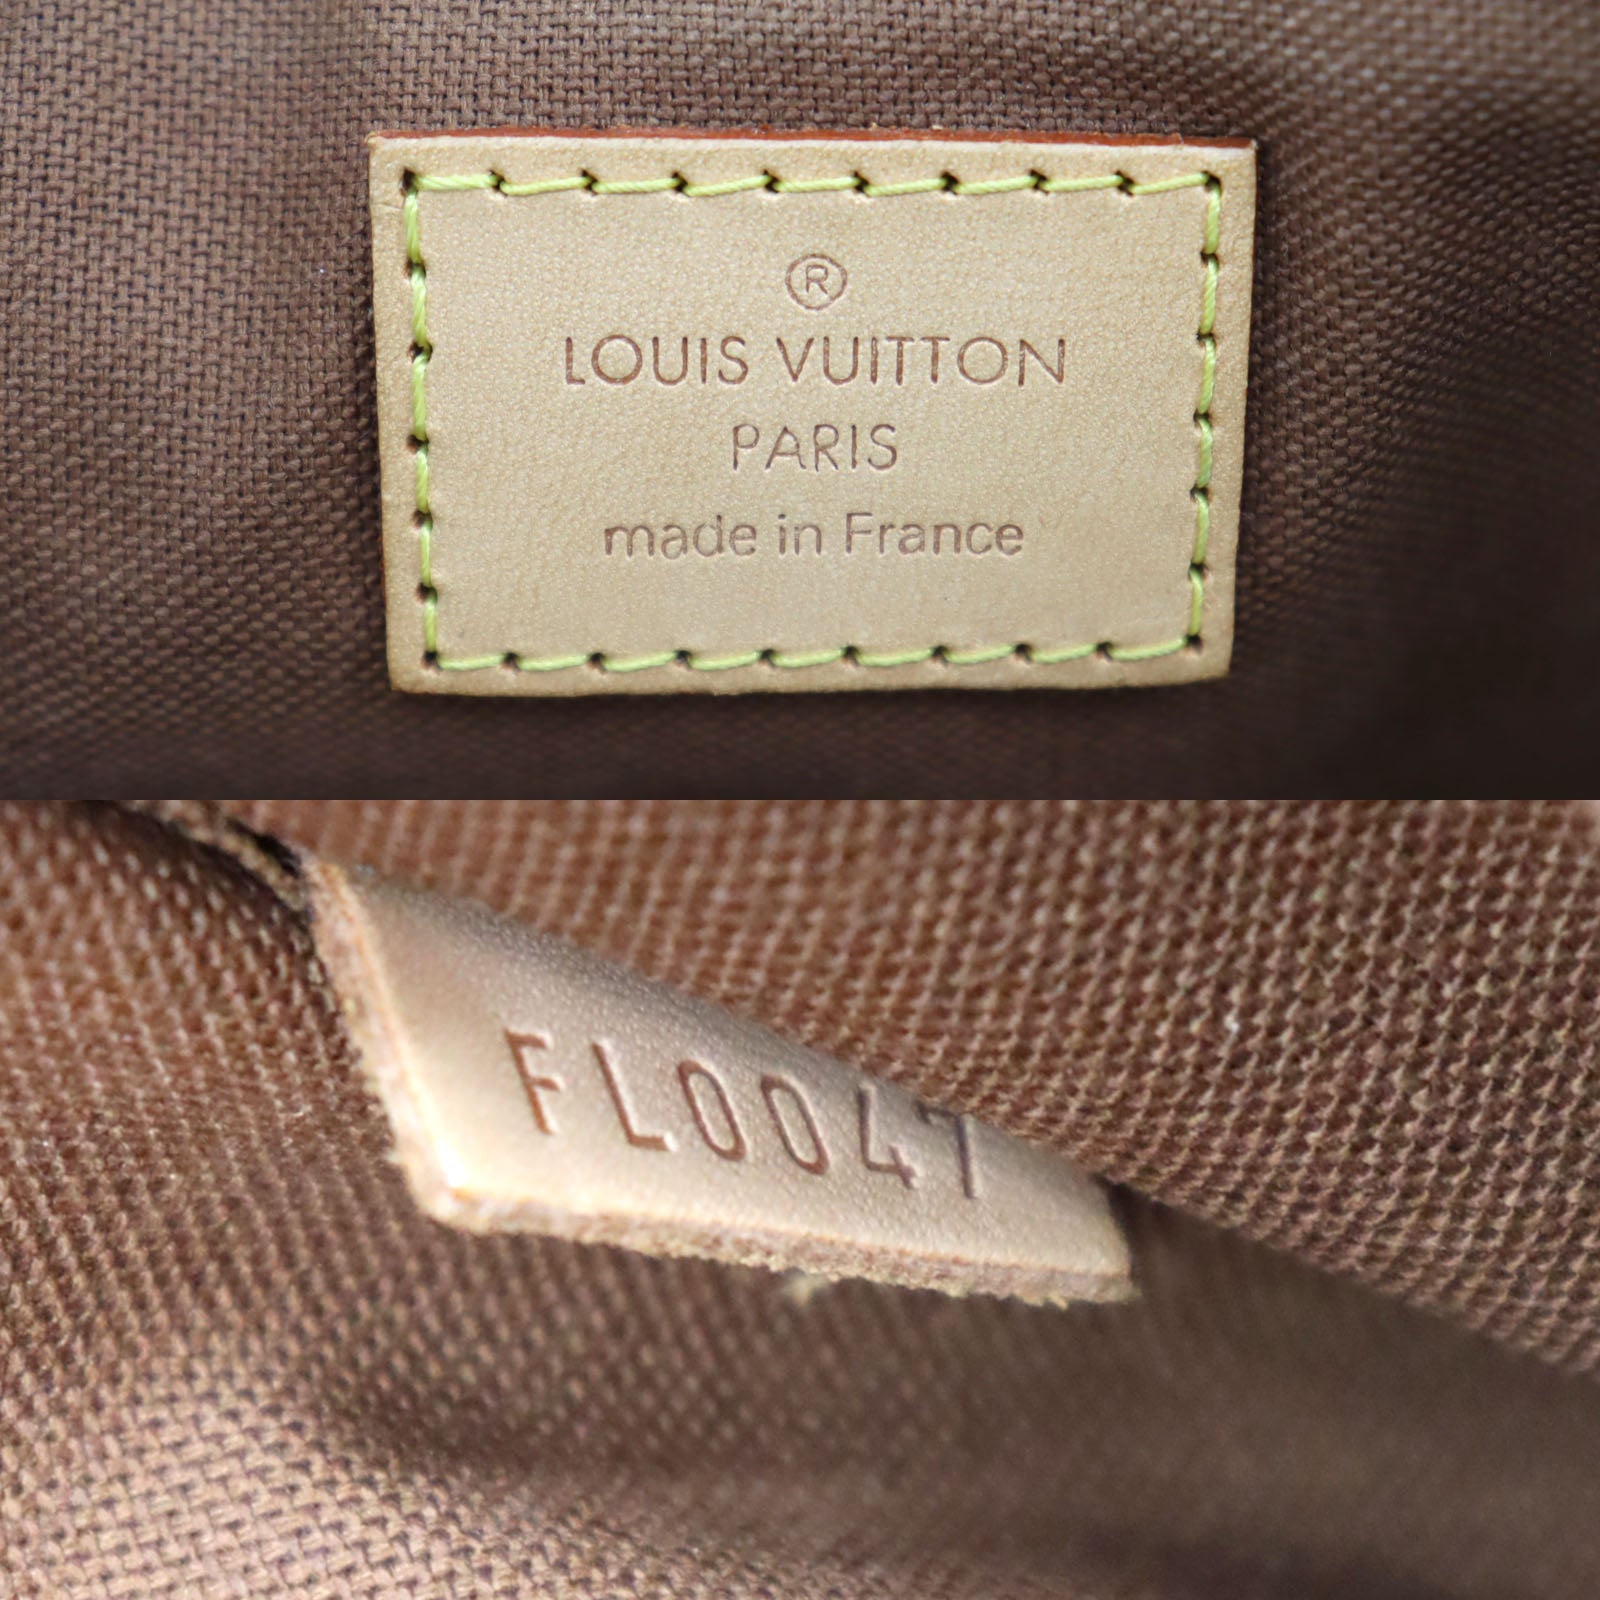 Shop for Louis Vuitton Monogram Canvas Leather Popincourt Haut Bag -  Shipped from USA